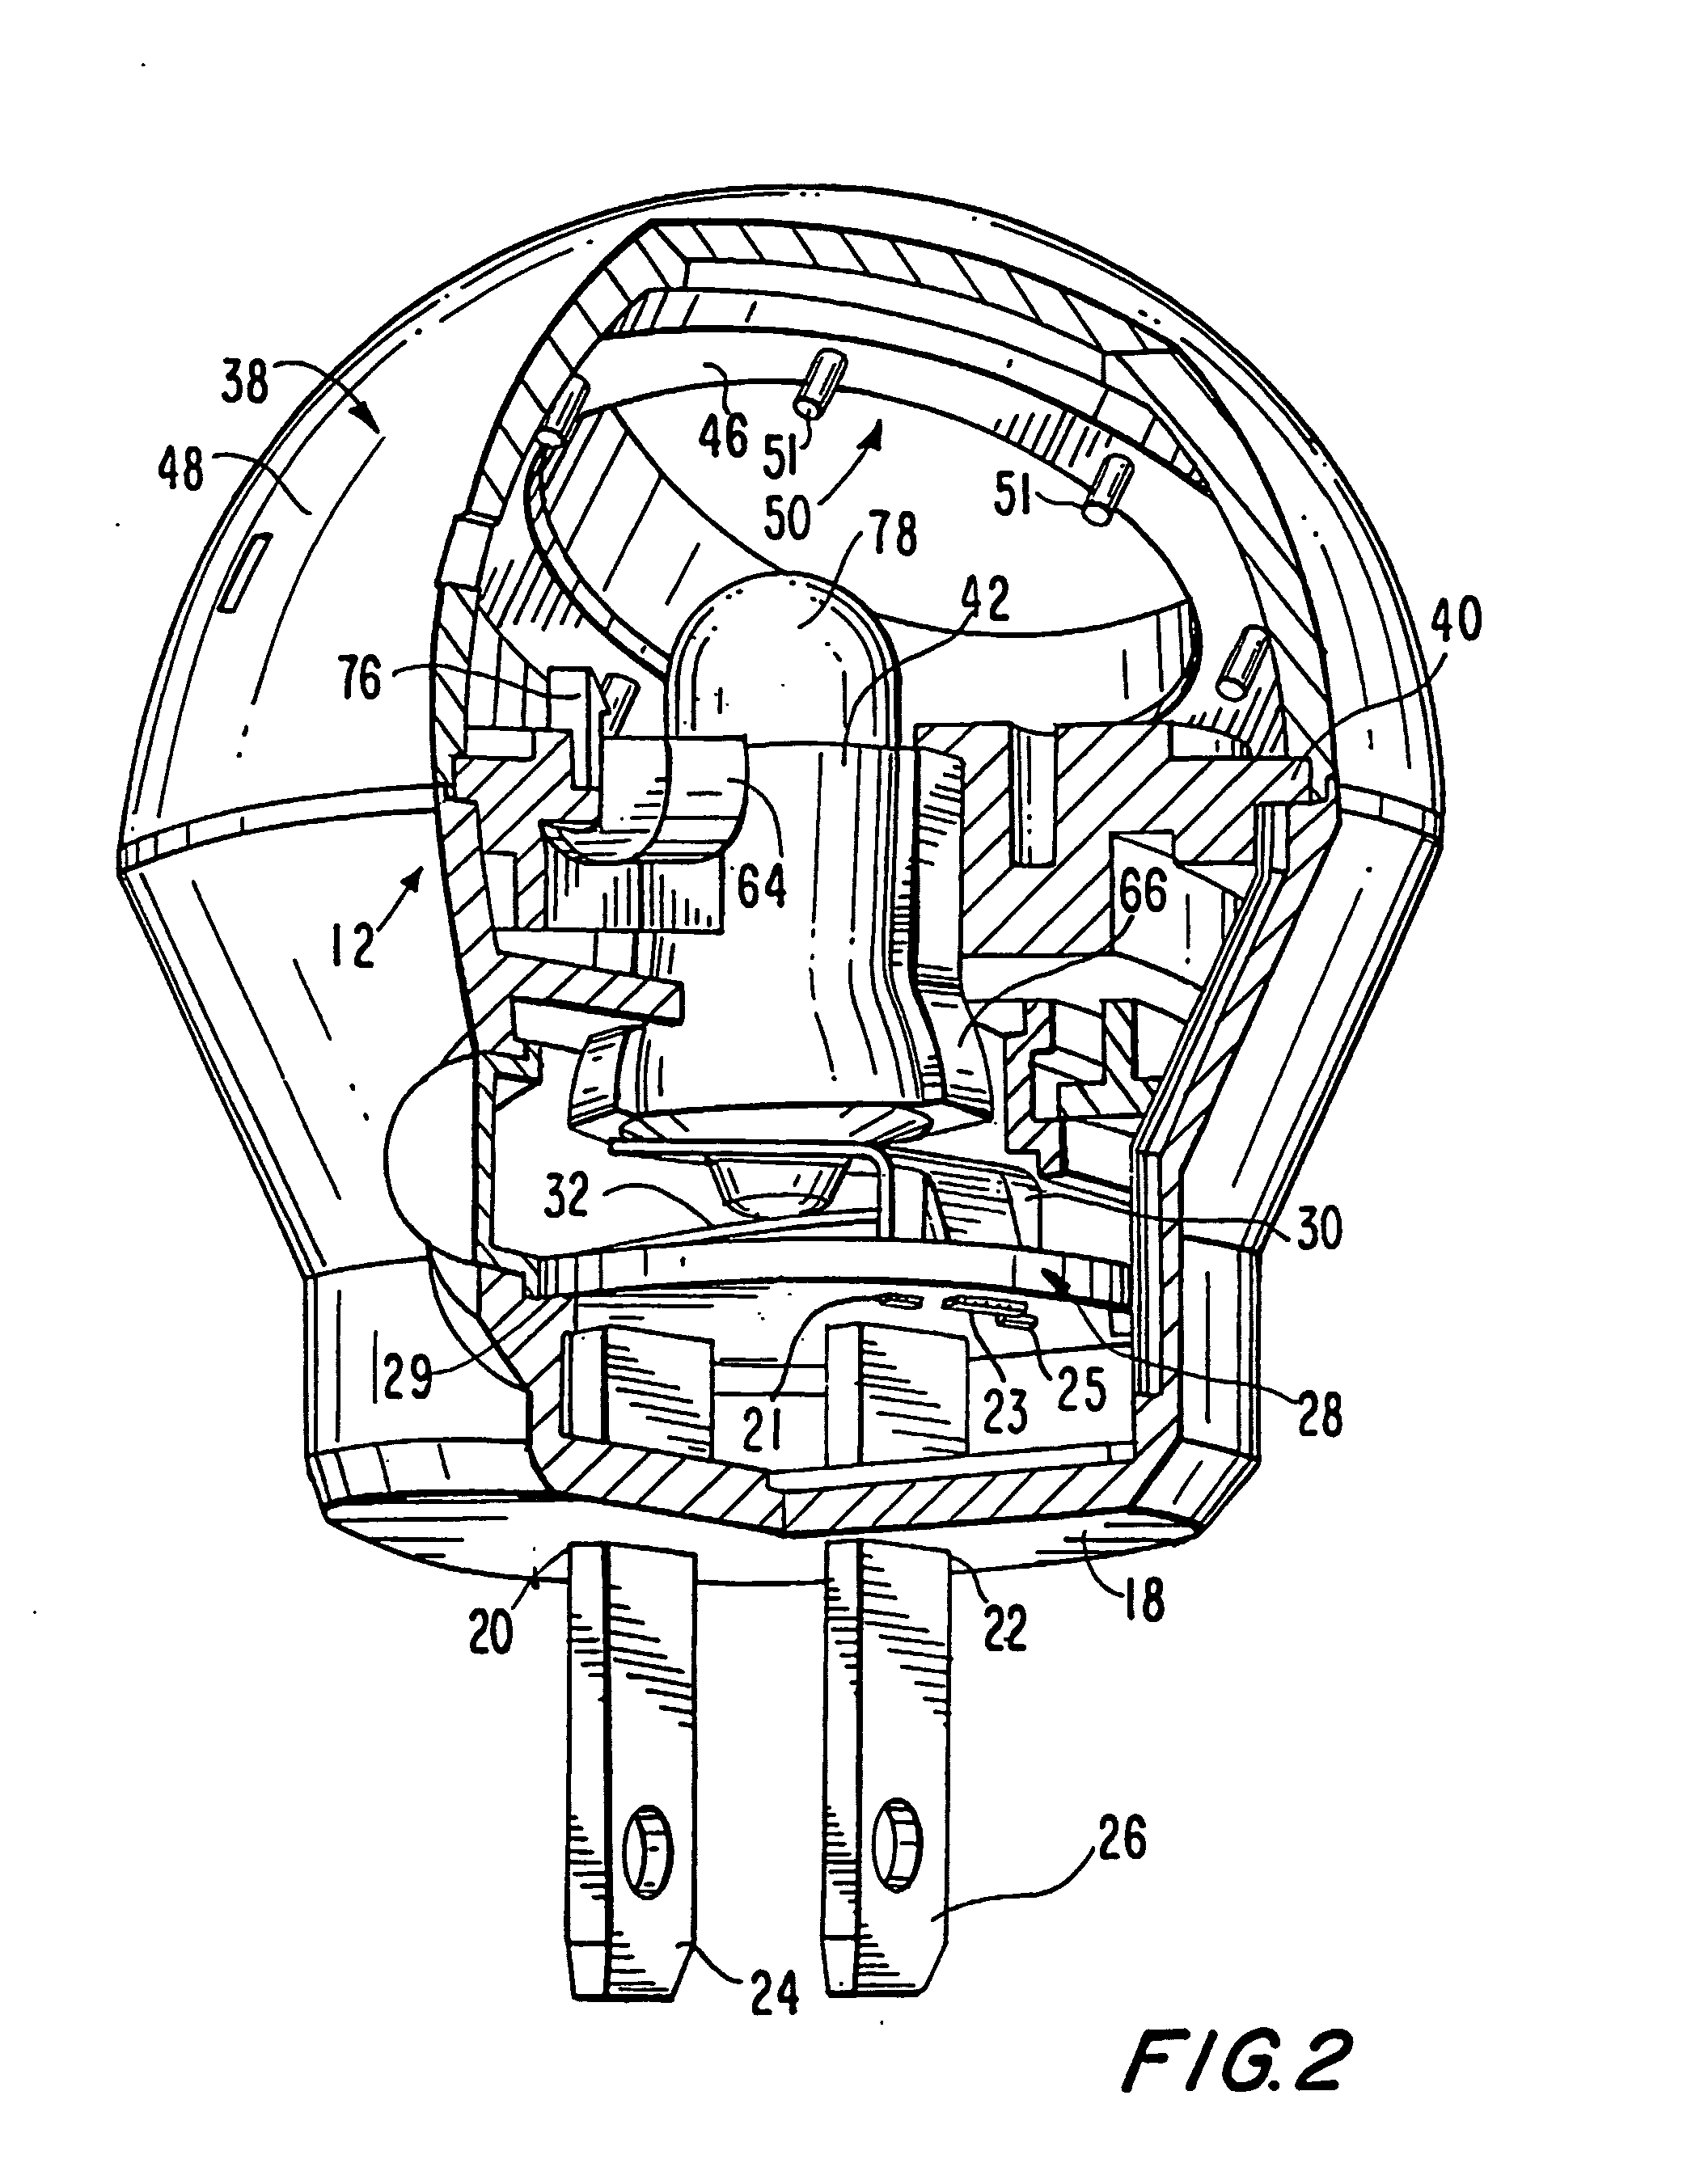 Nightlight, led power supply circuit, and combination thereof